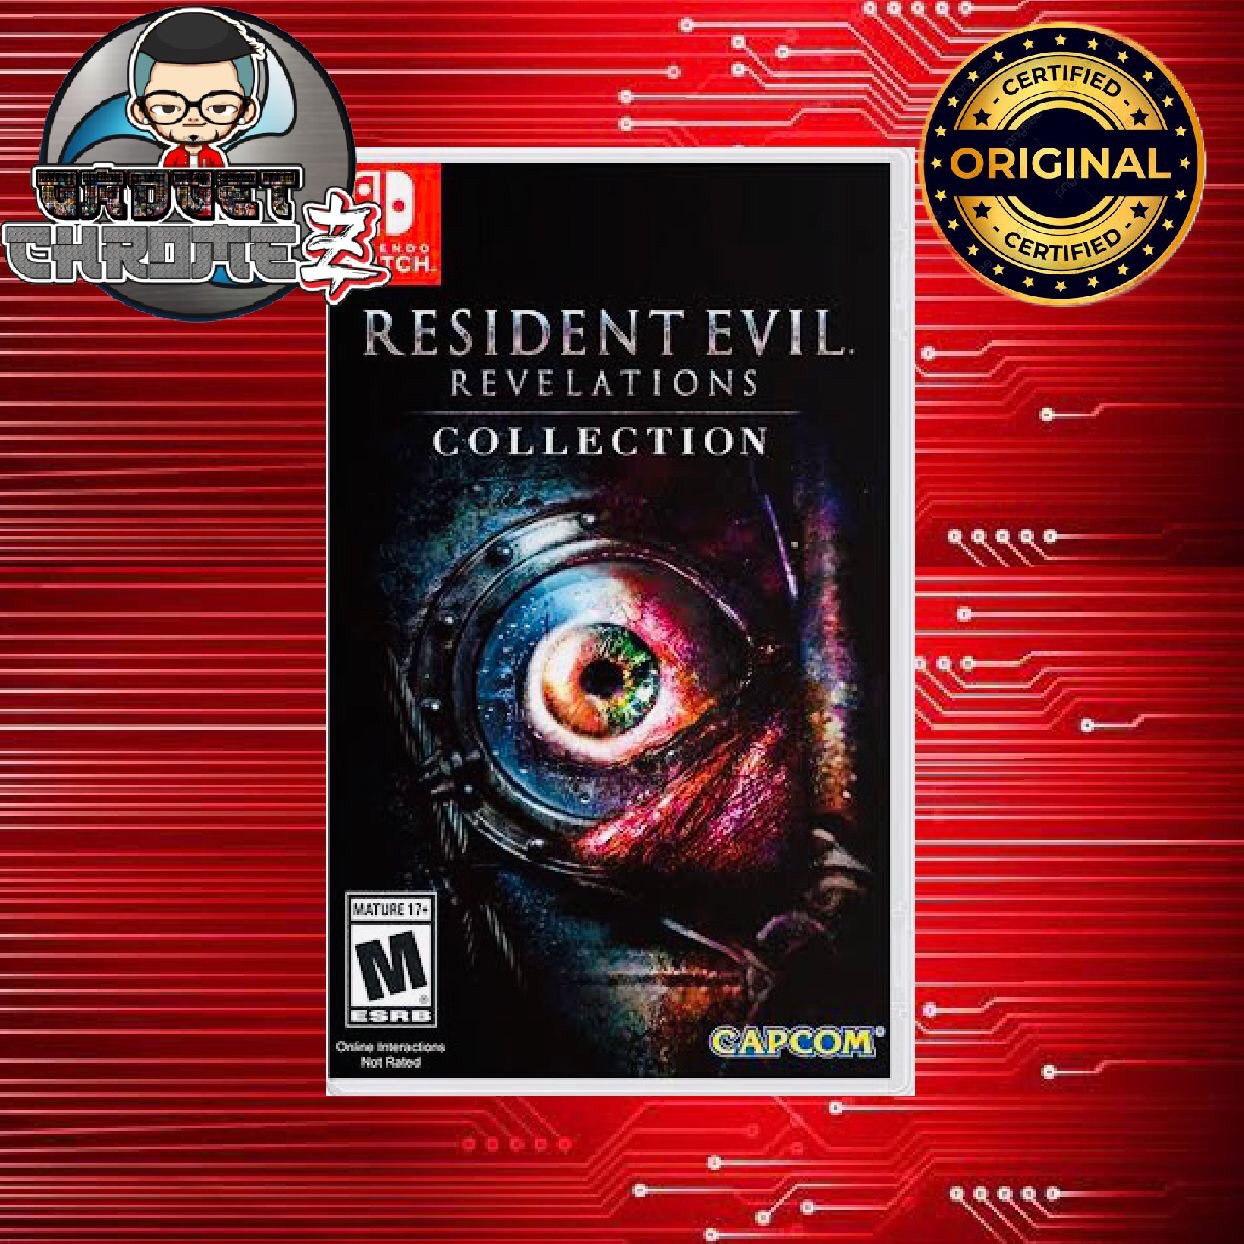 Resident Evil Revelations Collection - Nintendo Switch, Nintendo Switch